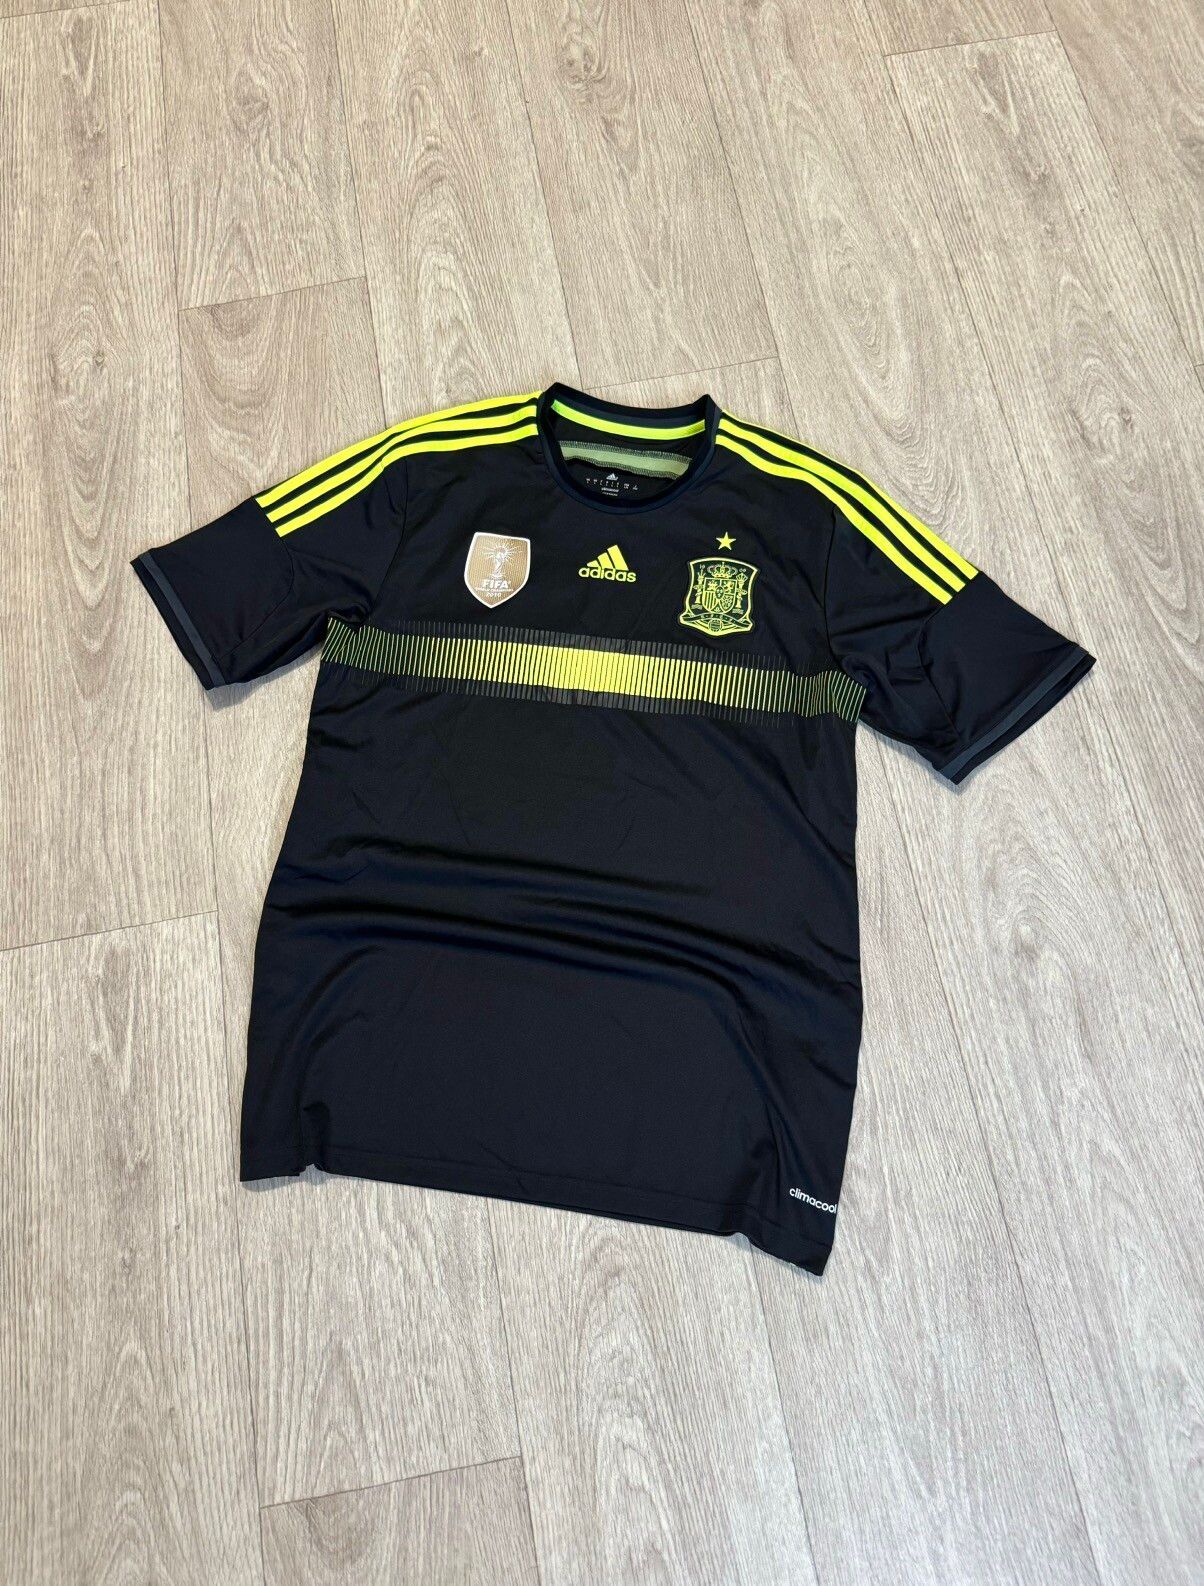 Pre-owned Soccer Jersey X Vintage Adidas Spain World Champions Soccer Jersey In Black